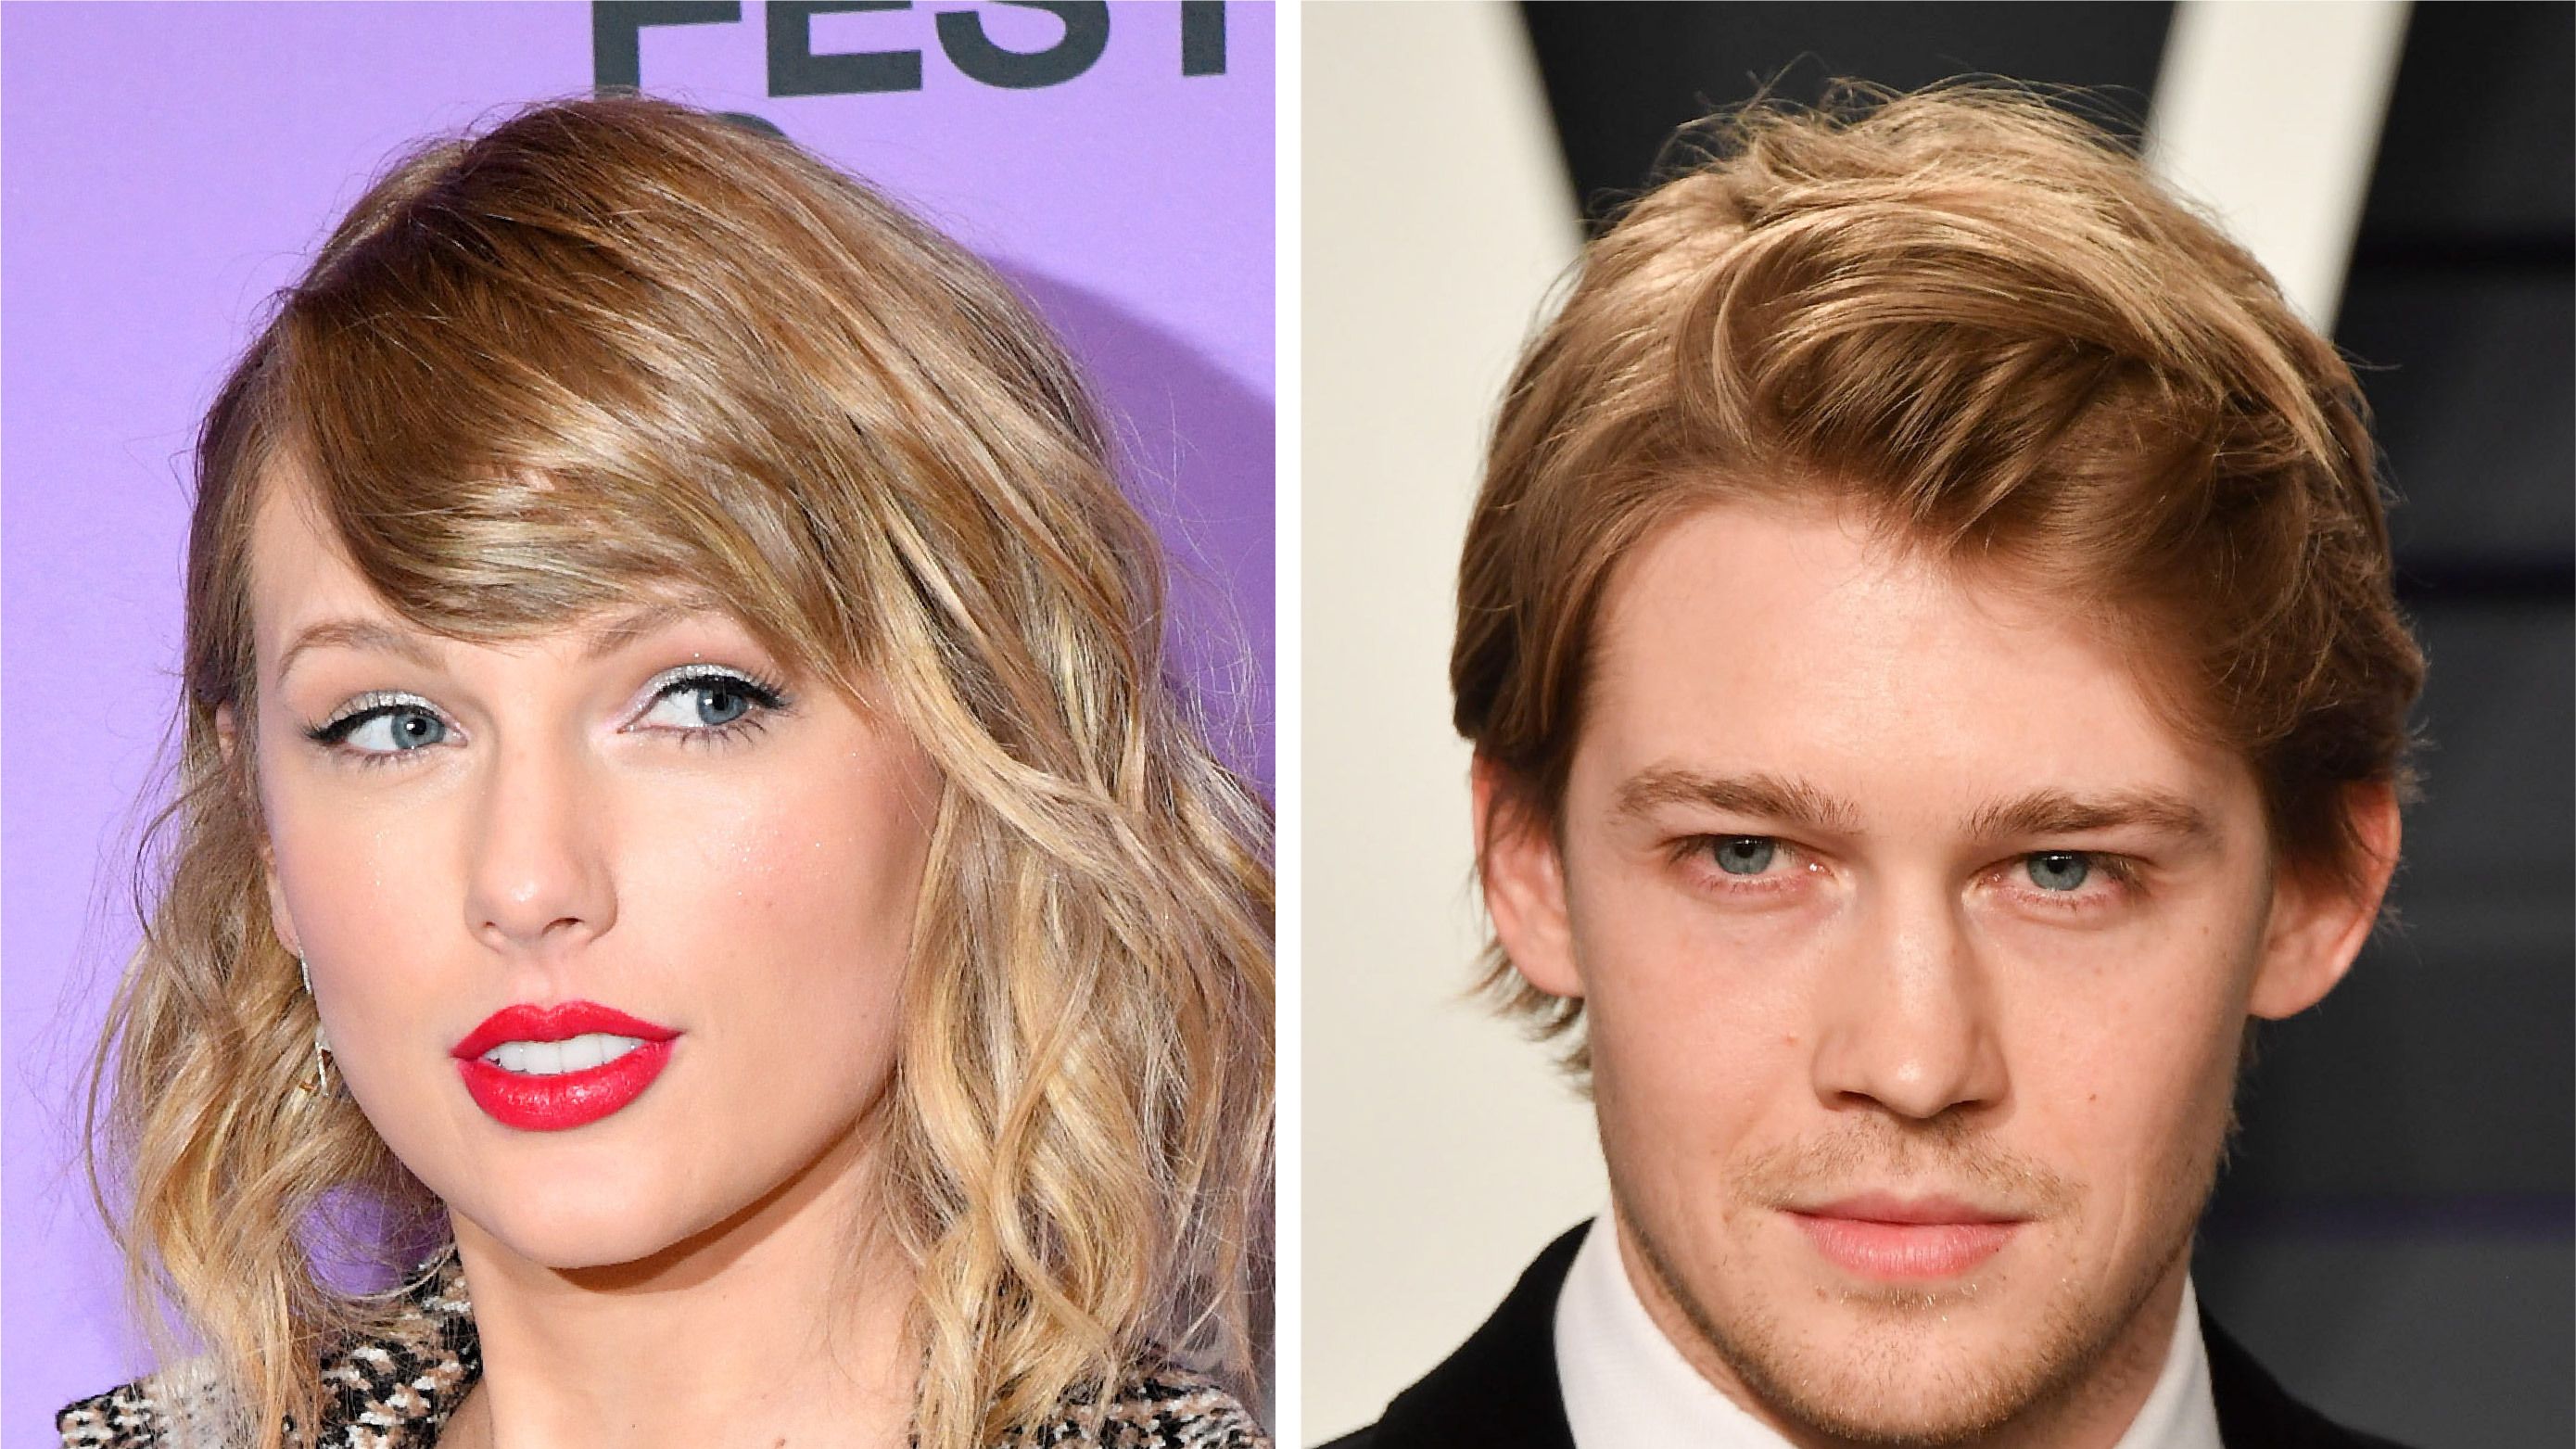 Taylor Swift and Joe Alwyn's Relationship: A Complete Timeline